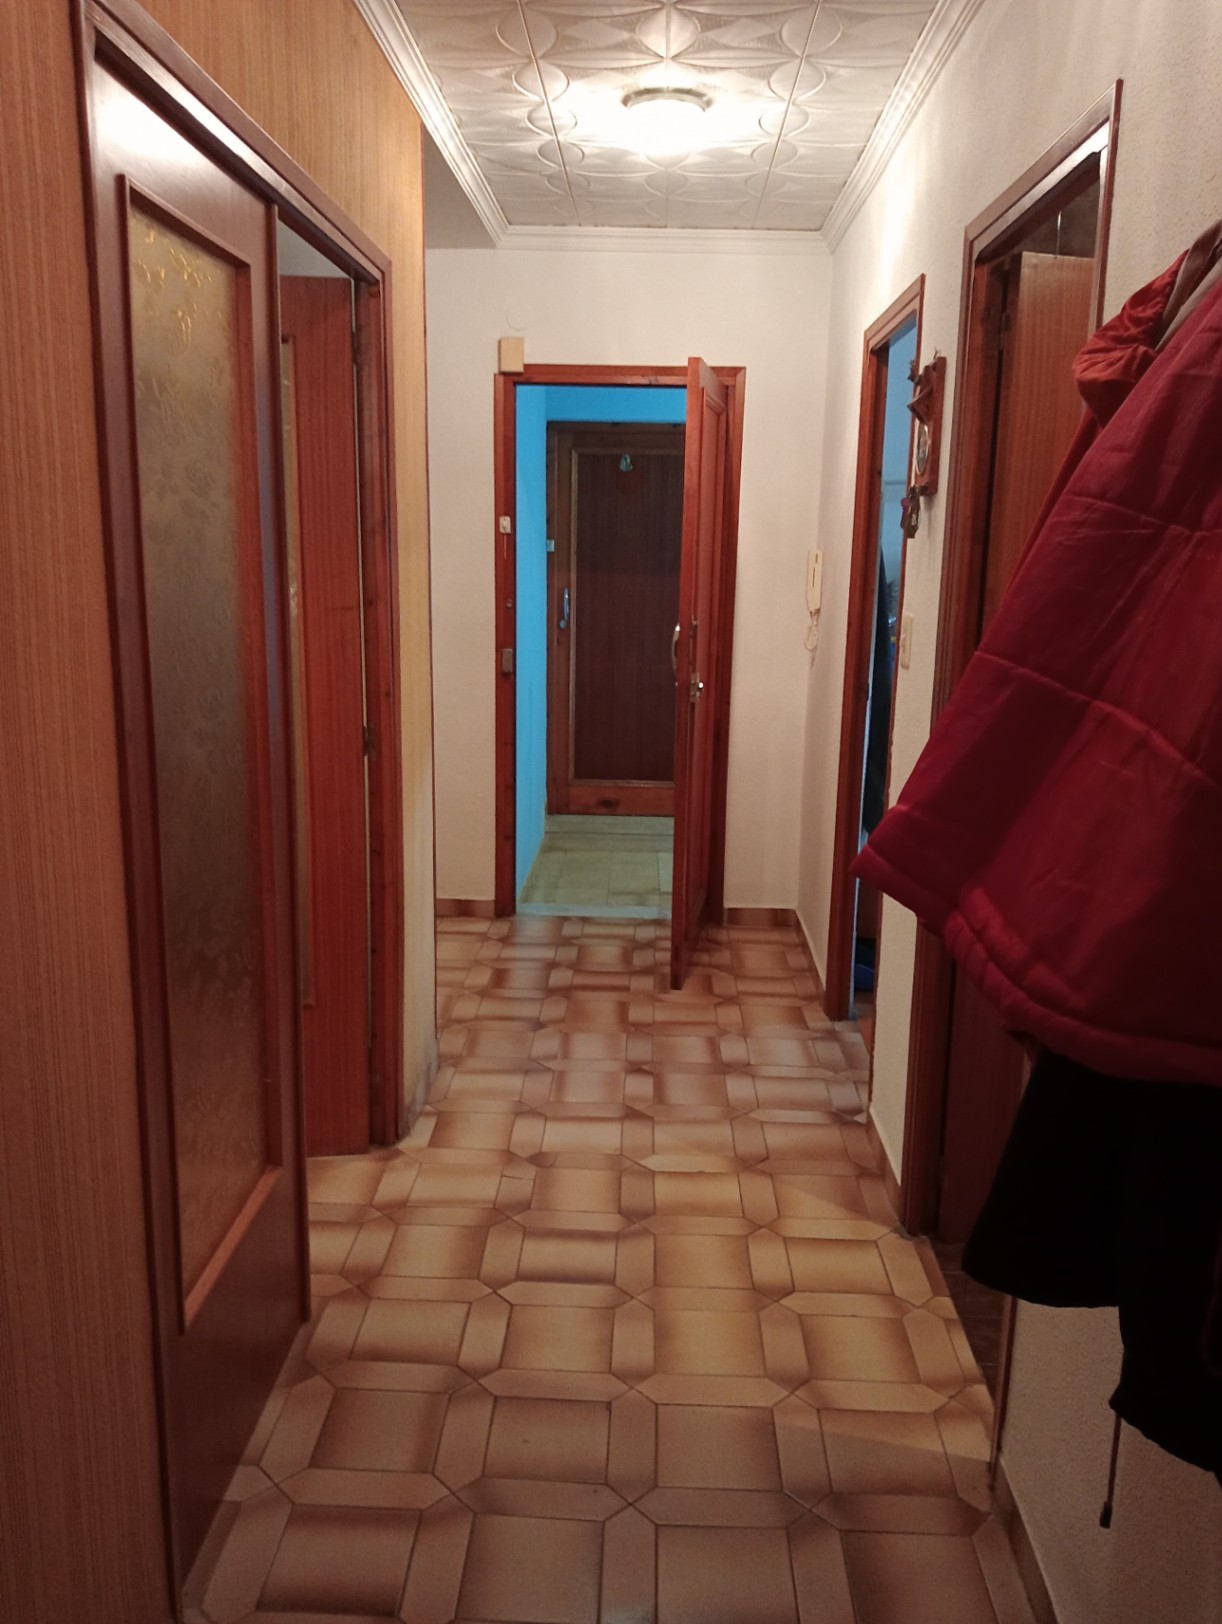 Double apartment for sale in ondara